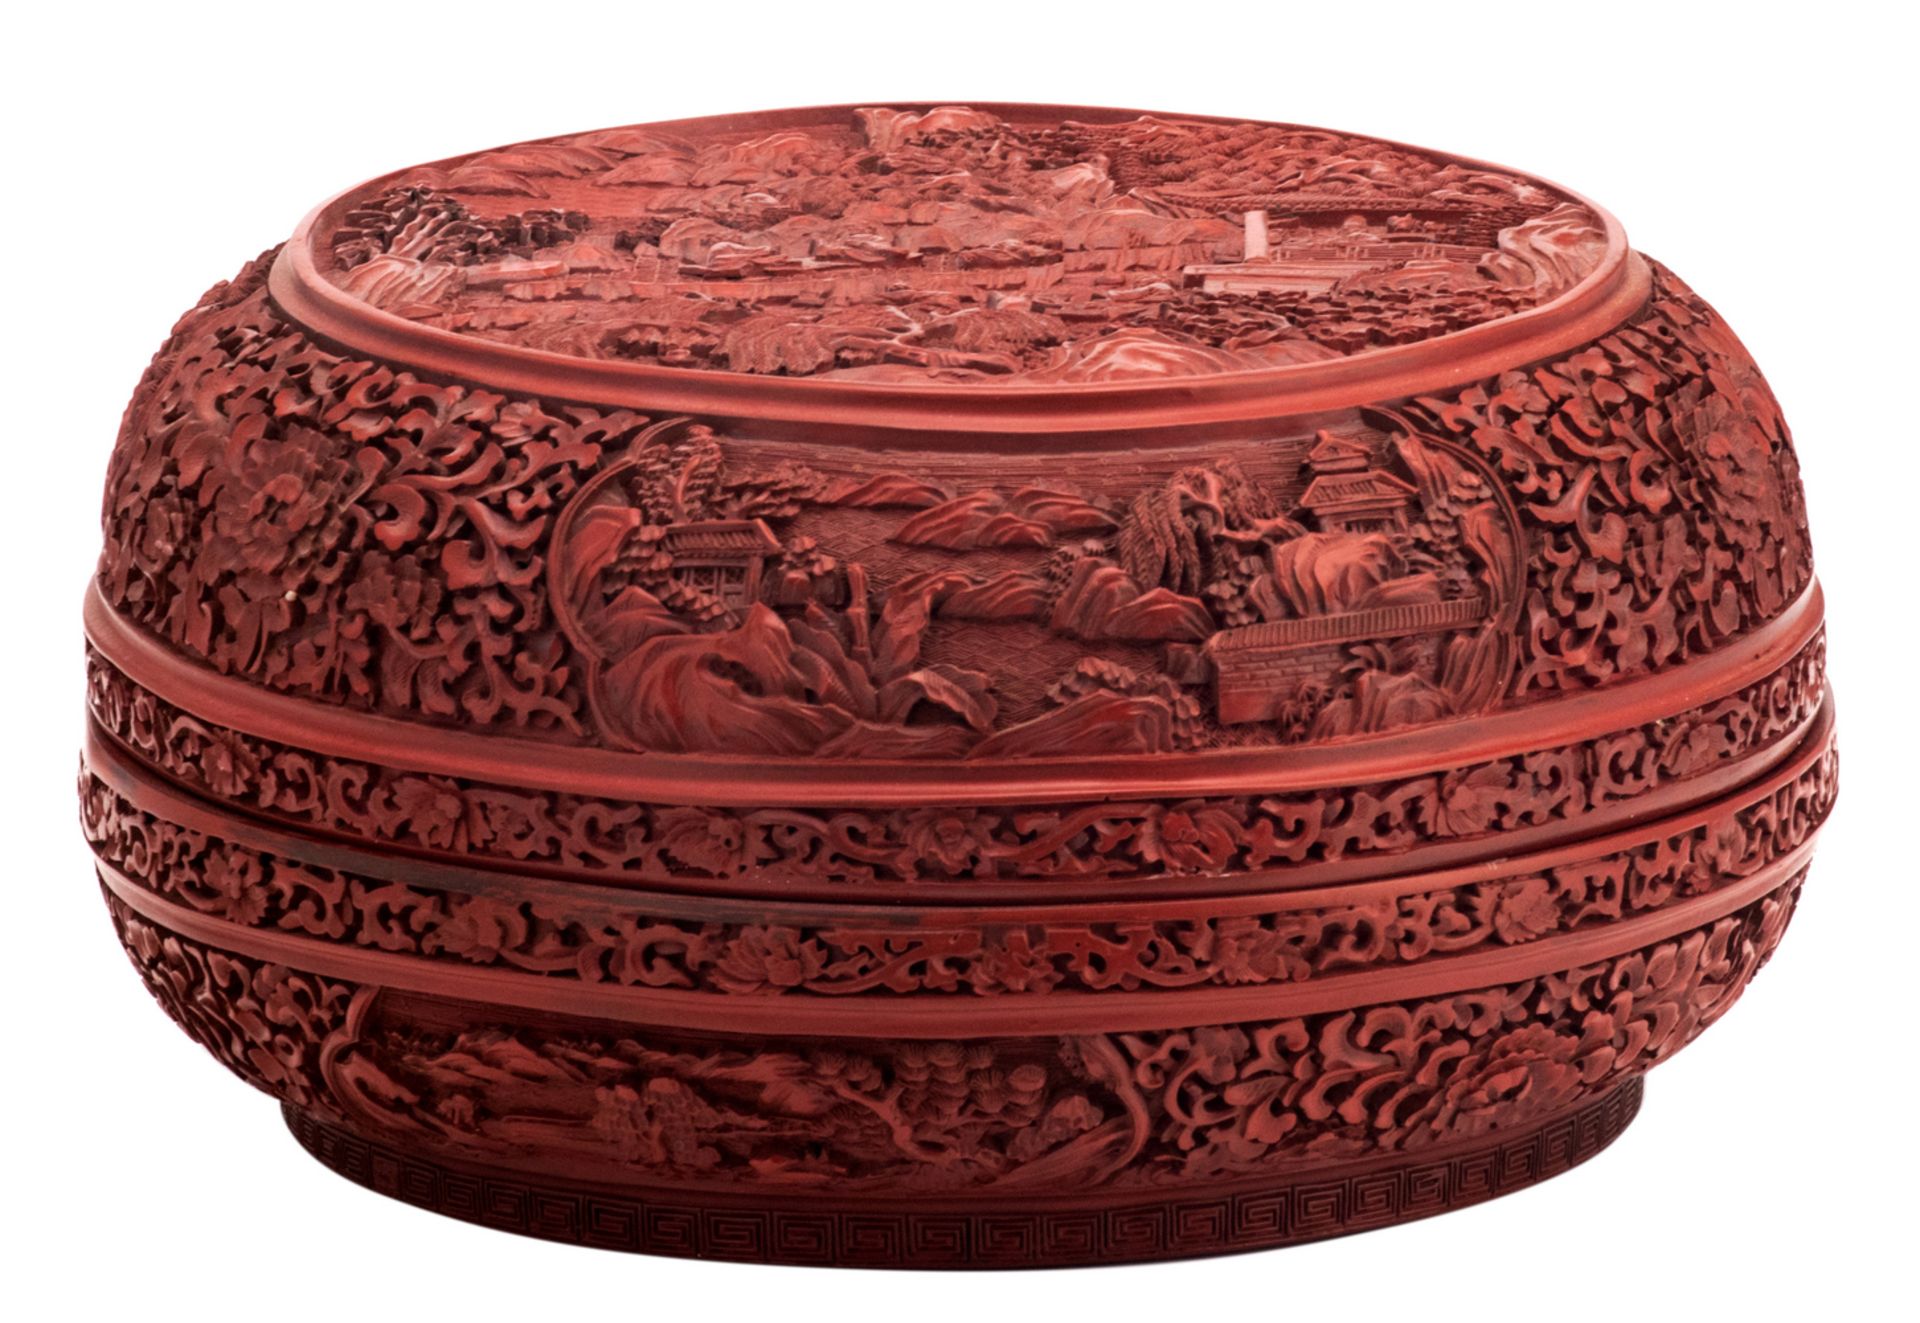 A fine Chinese red cinnabar lacquered bowl and cover, floral decorated, the roundels with